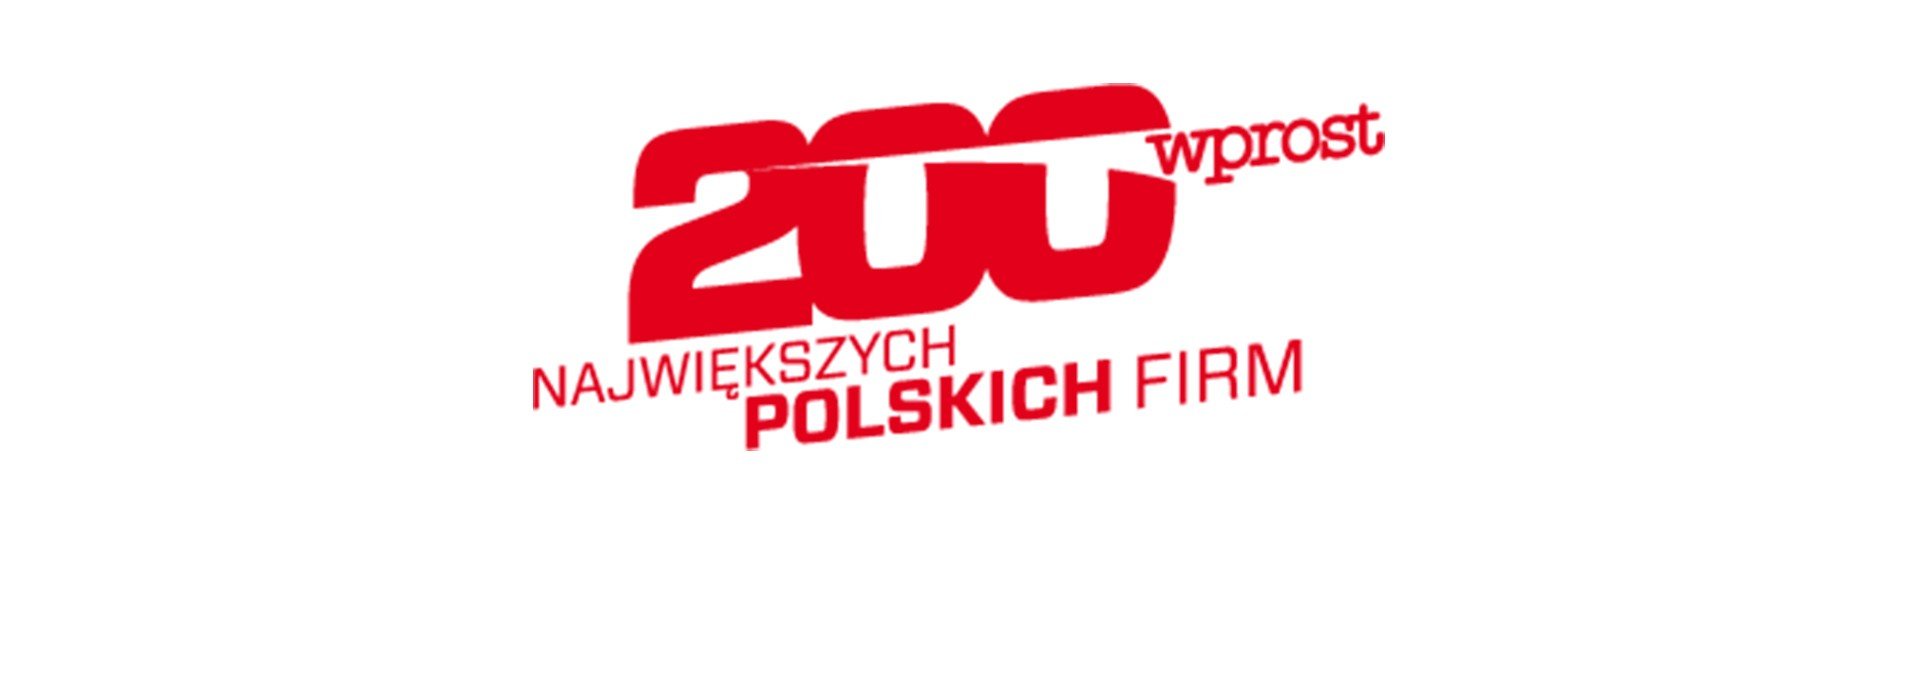 Drutex advances in the „Wprost” list of the 200 biggest Polish companies